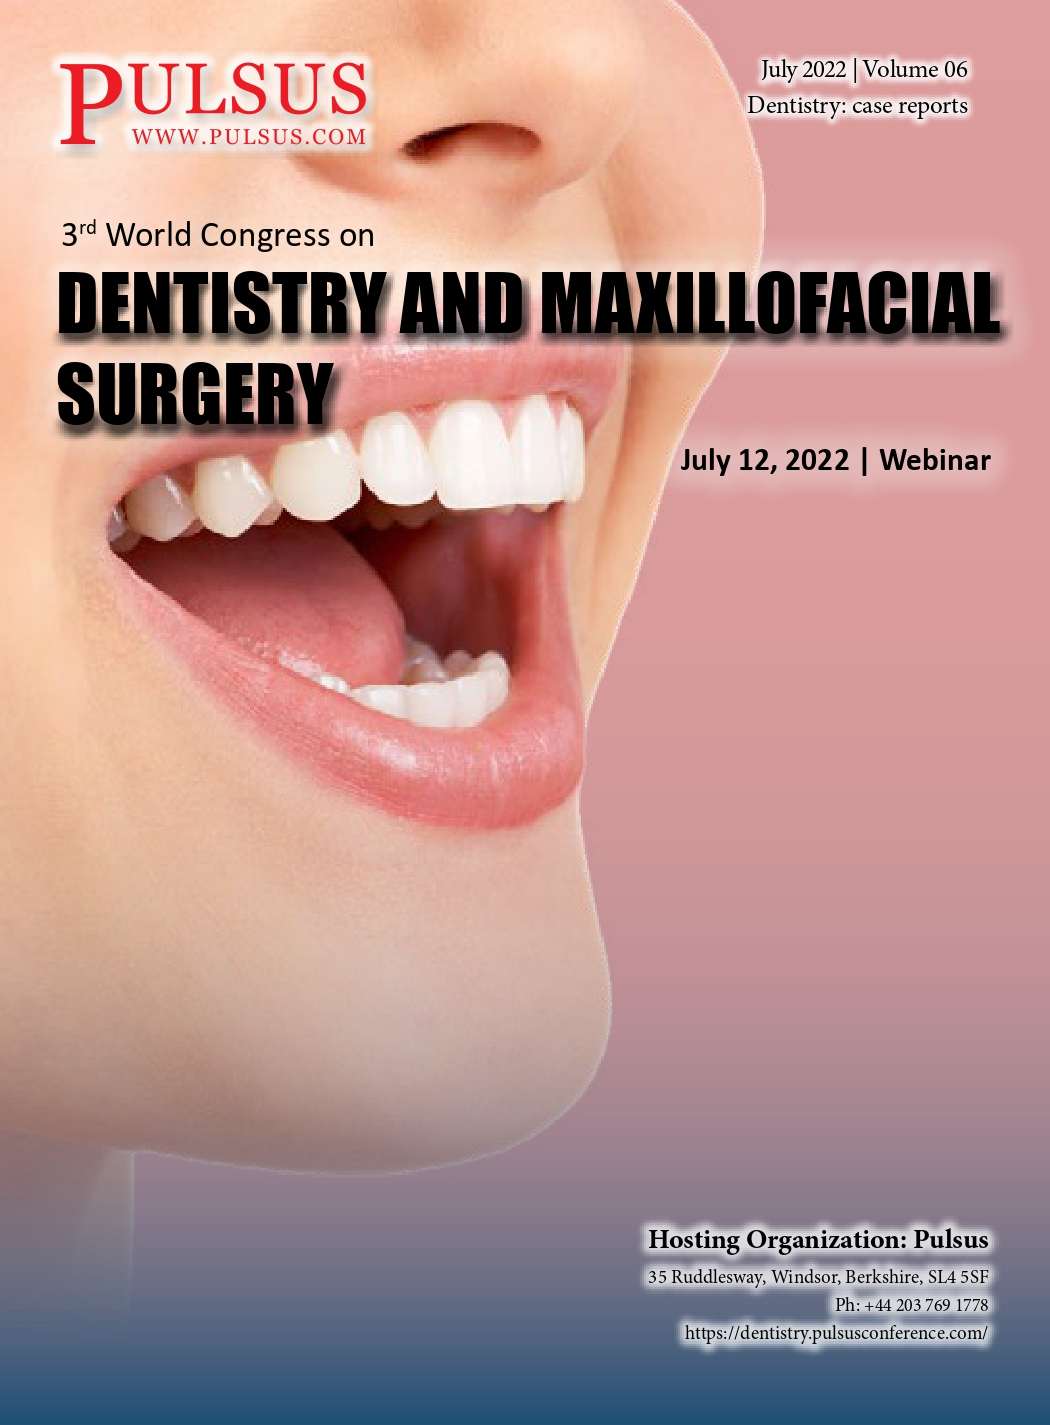 https://www.pulsus.com/conference-abstracts/dentistry-congress-2022-proceedings.html